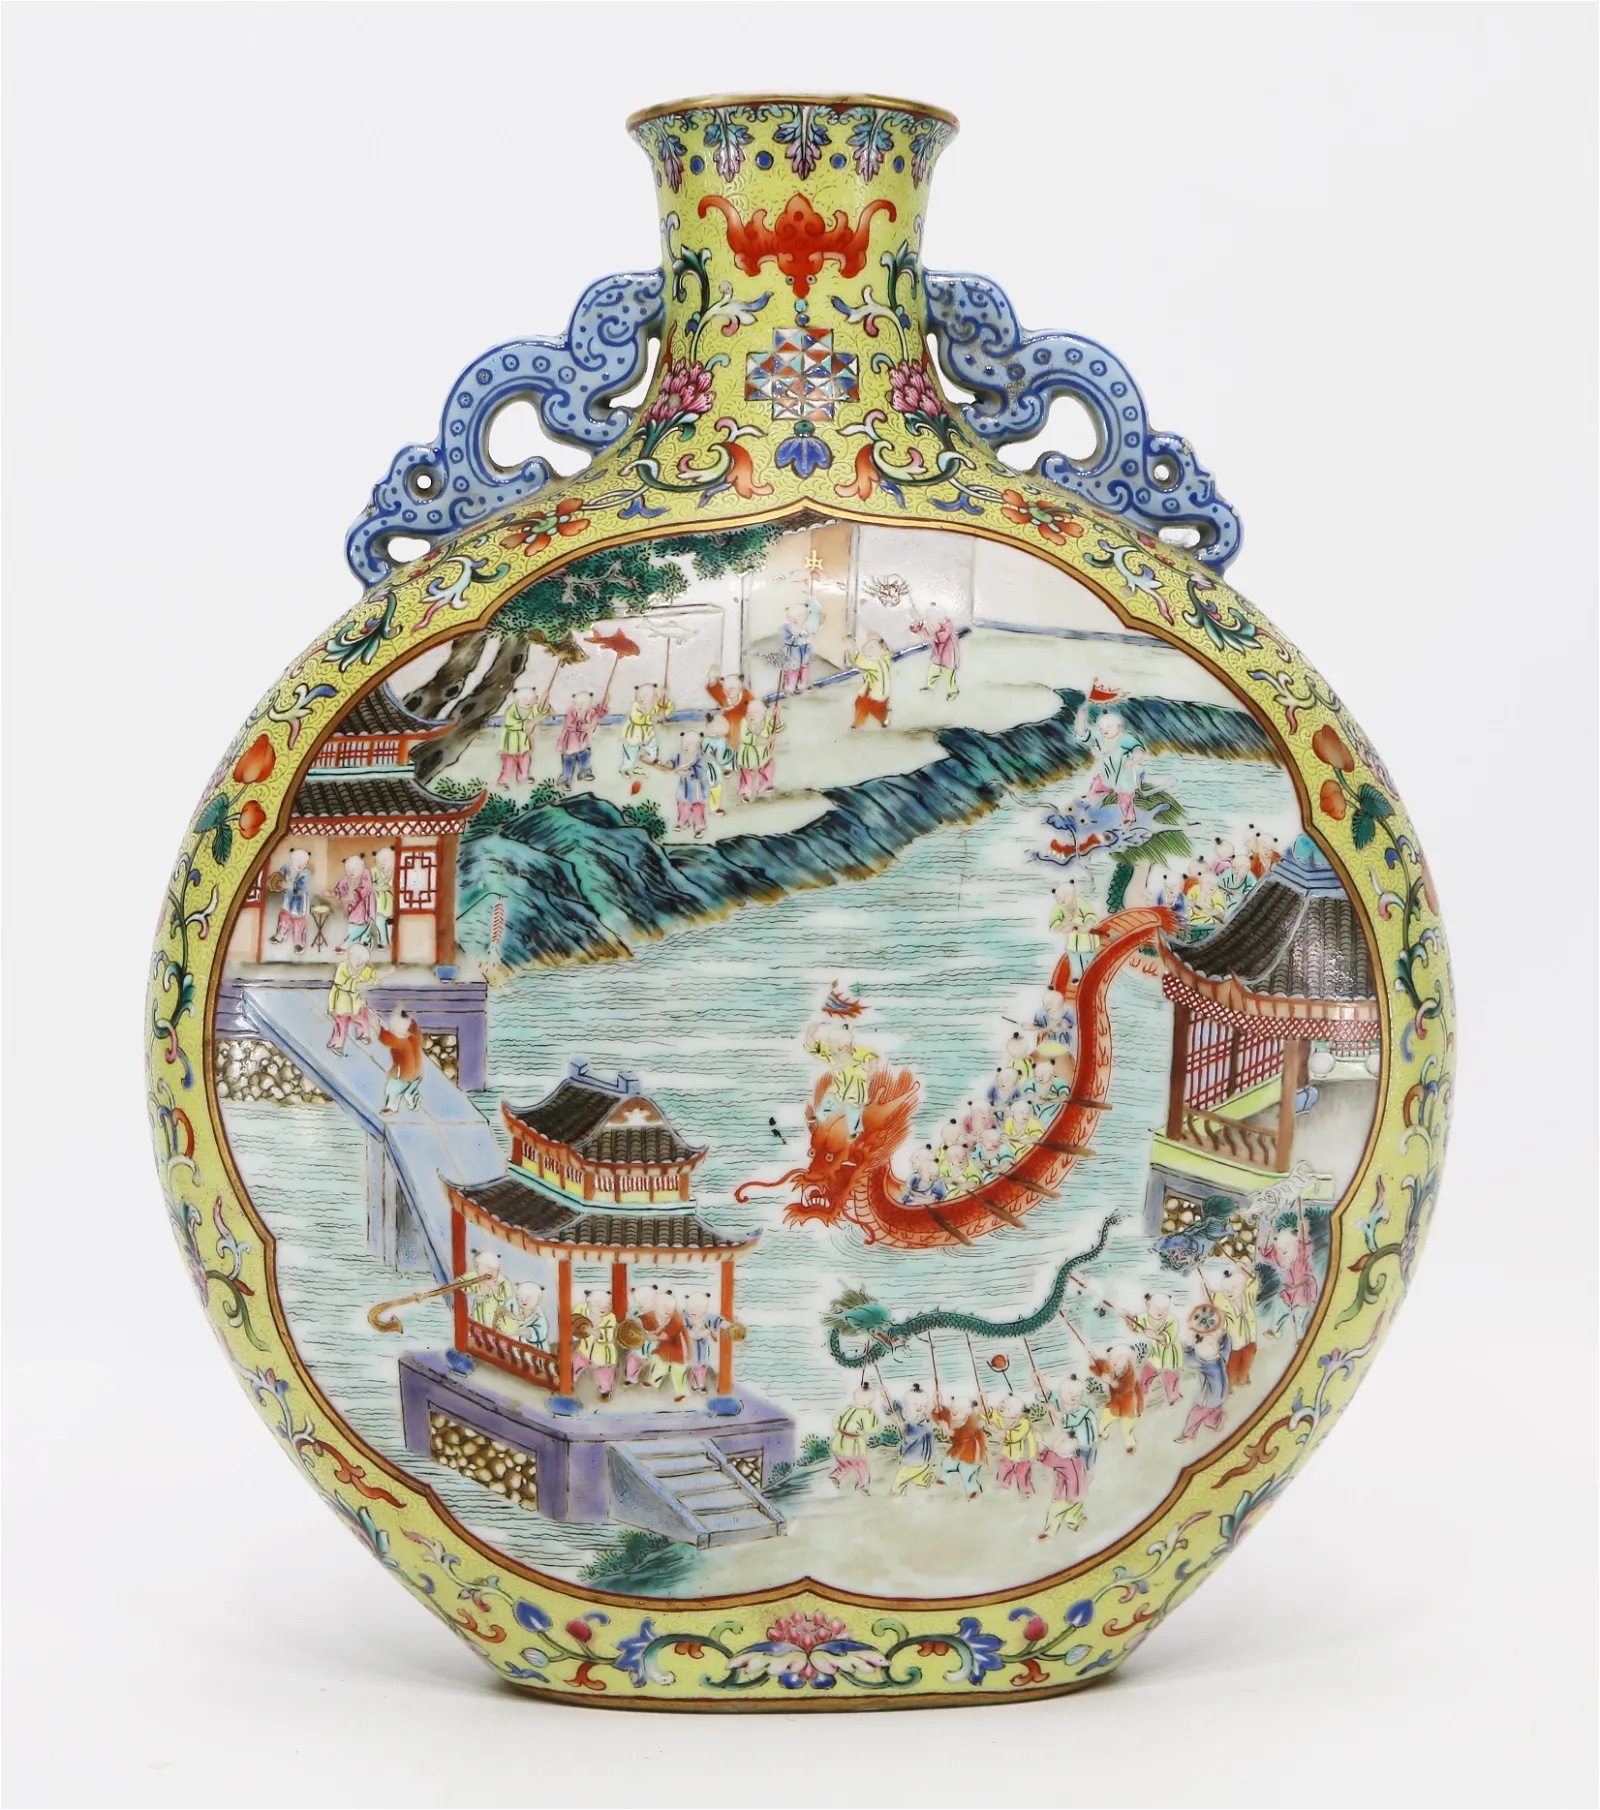 The Jaiqing marked famille rose moon flask sold for $155,000 at Dixon’s Crumpton Auction on January 25